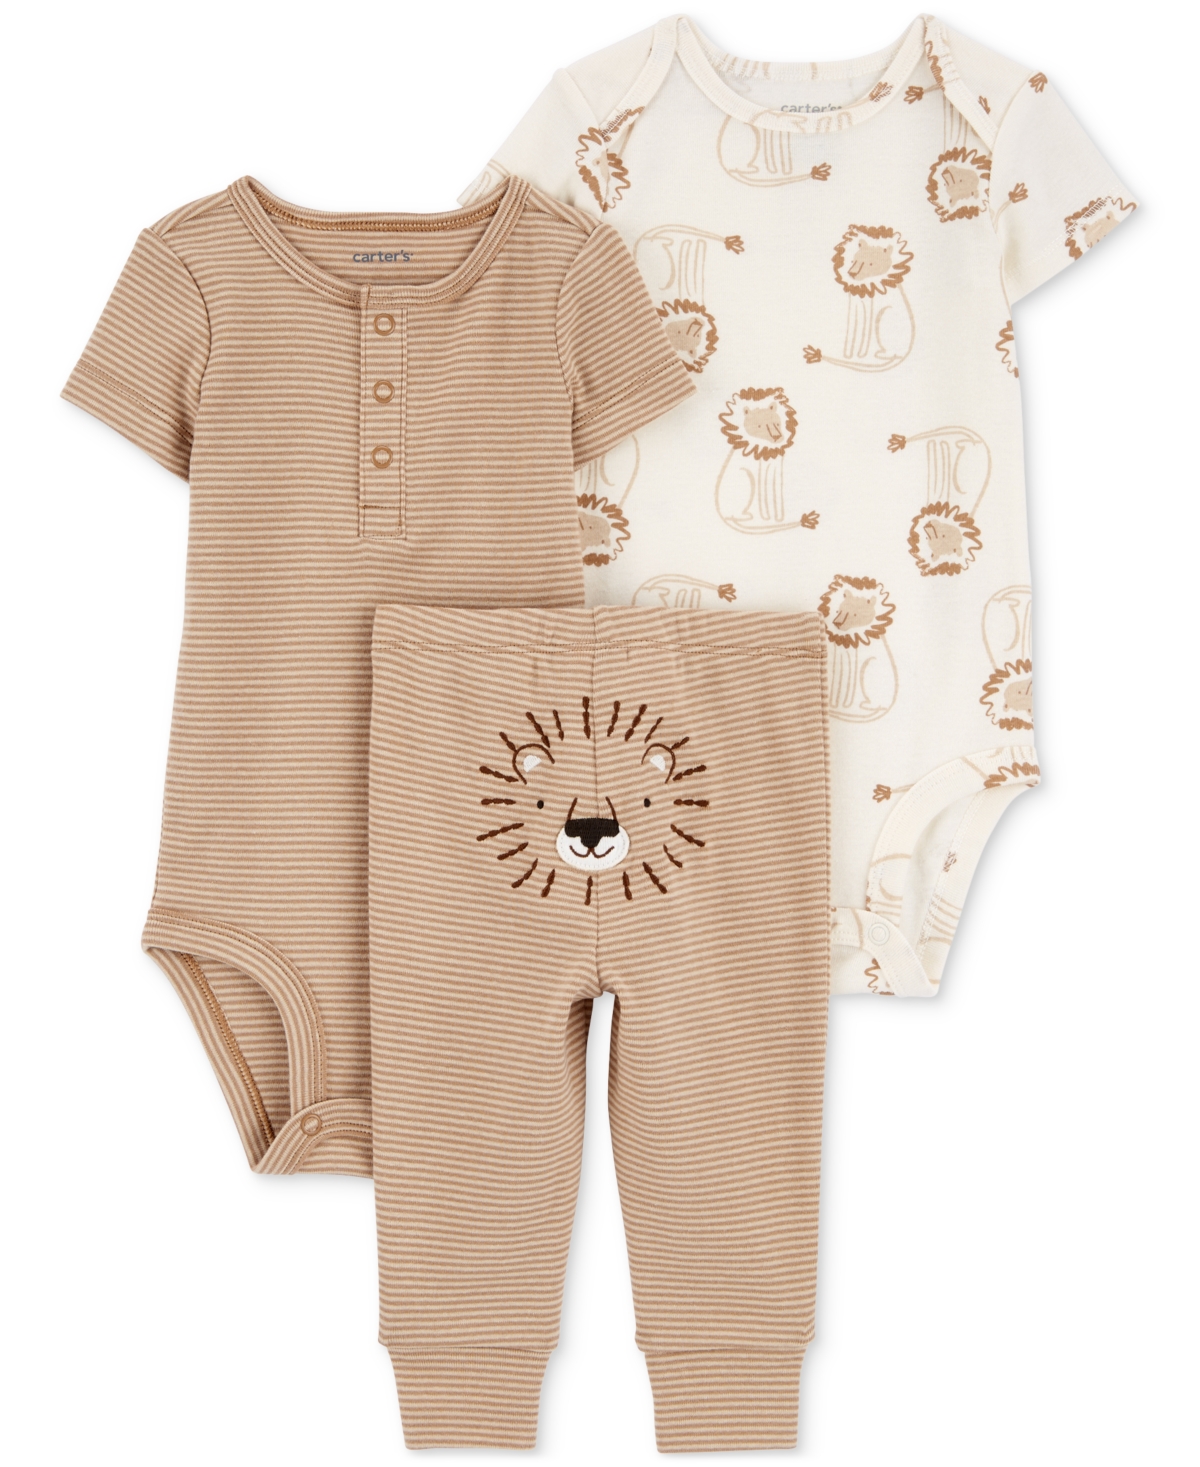 Carter's Baby Boys And Baby Girls 3-pc. Little Character Bodysuit & Pant Set In Brown